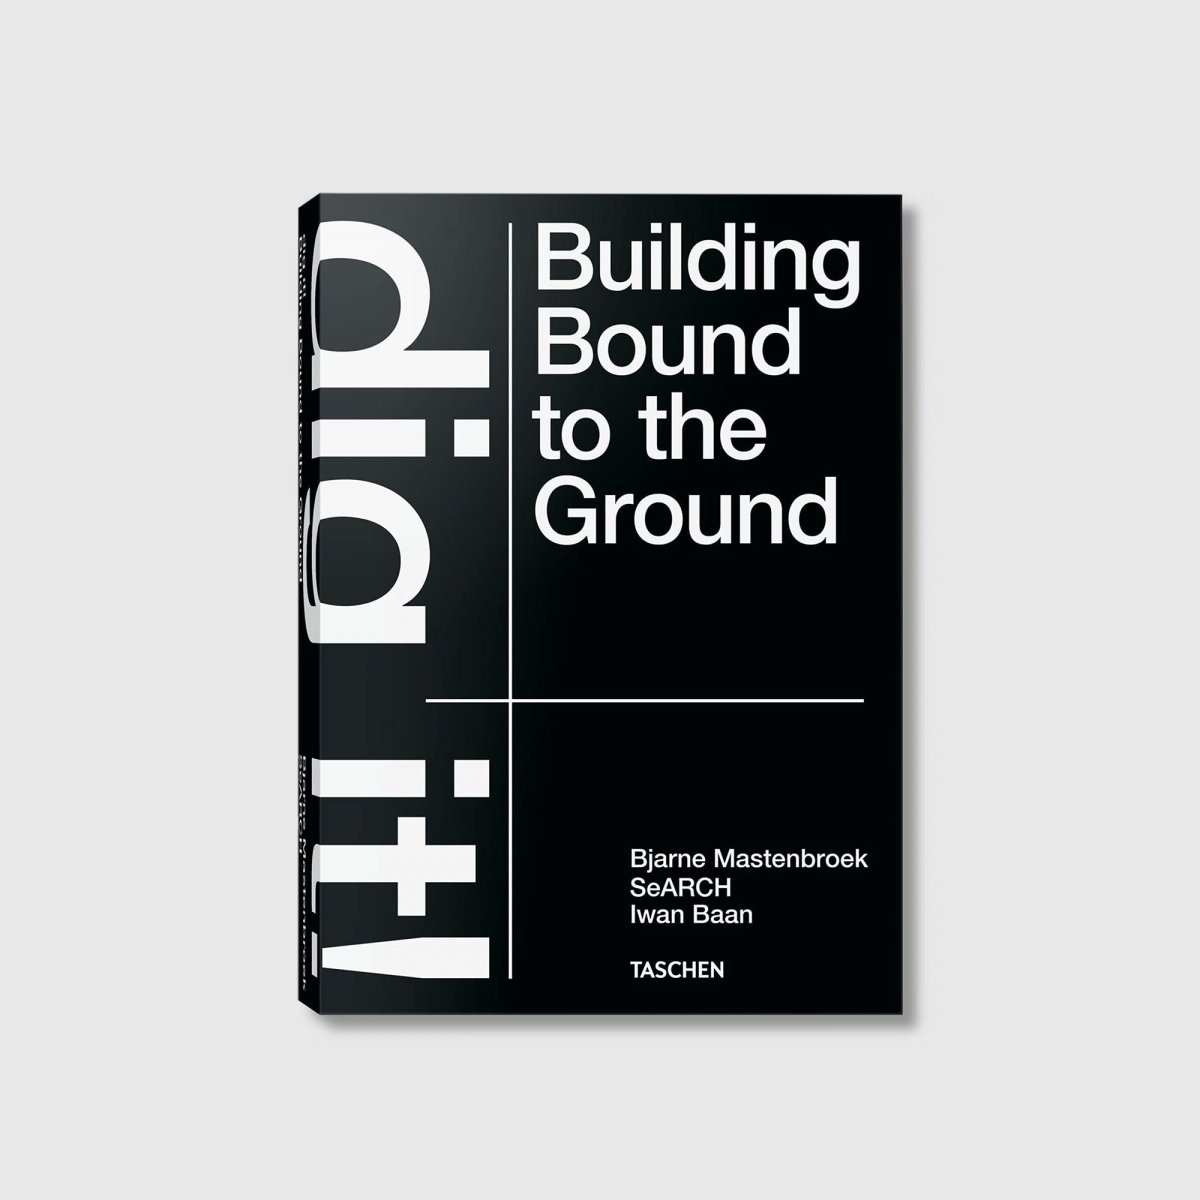 Dig it! Building Bound to the Ground - Autotype